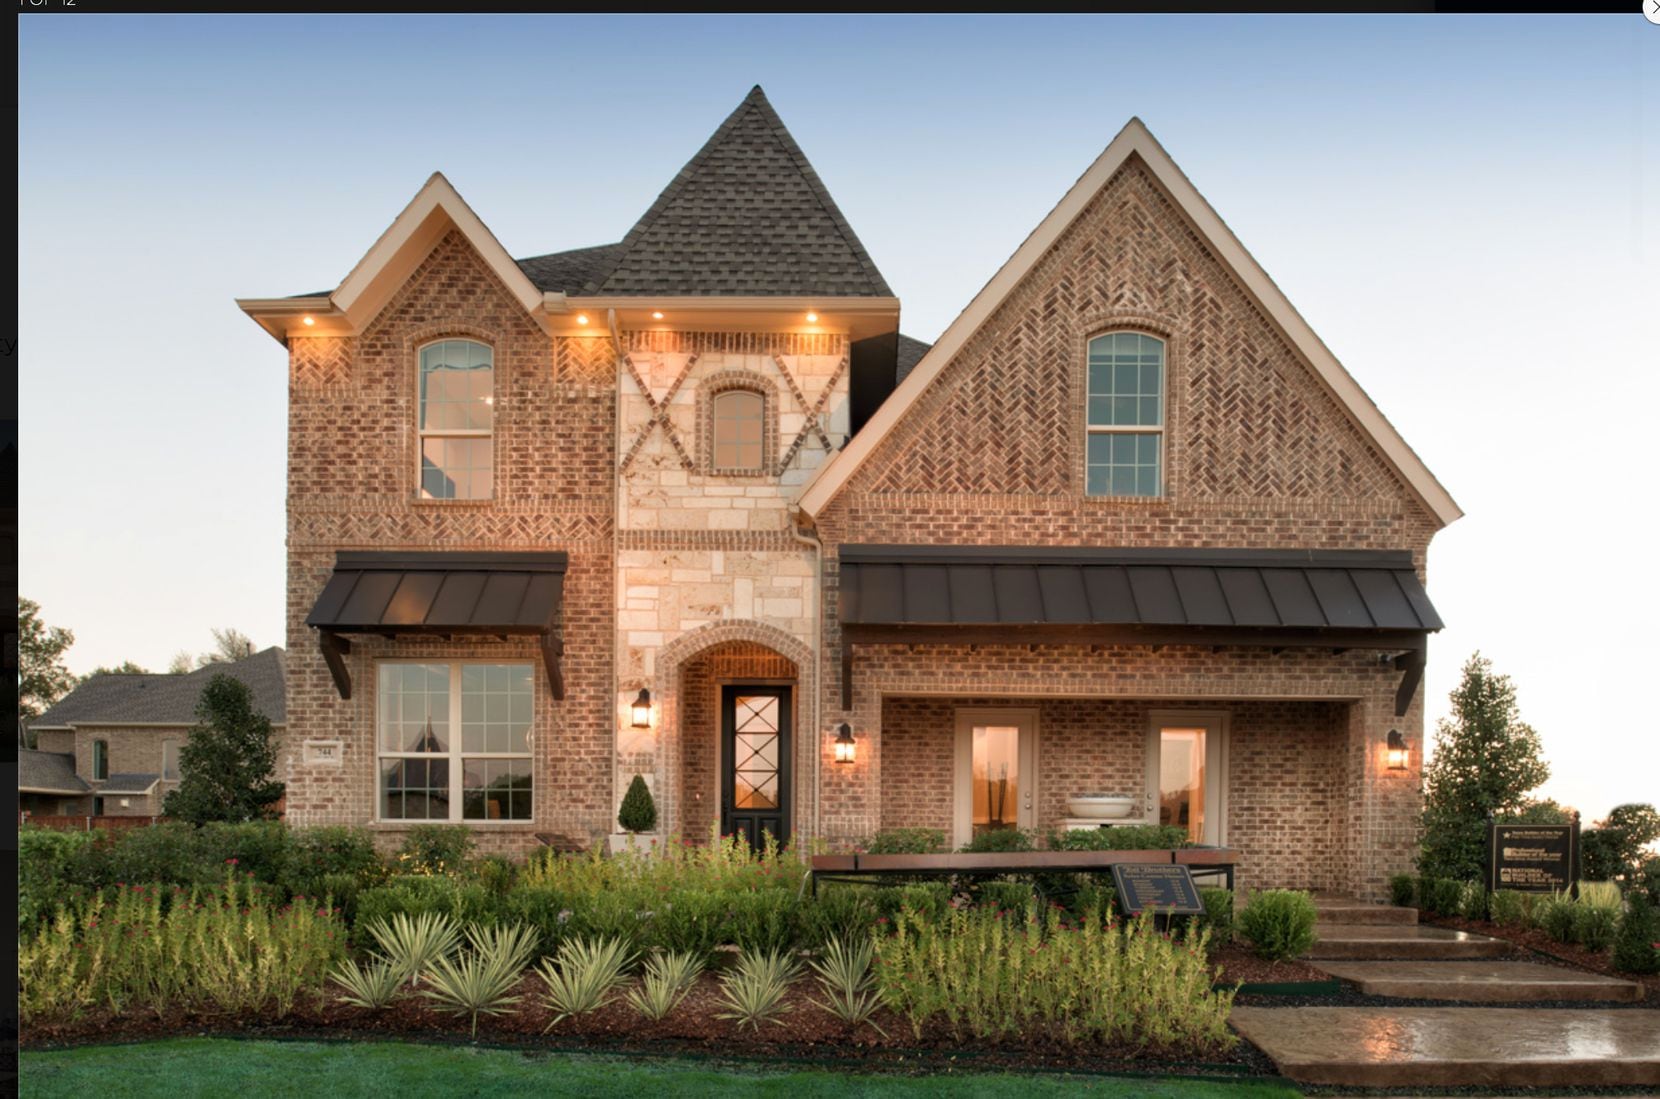 Toll Brothers builds more than 300 luxury single-family homes a year in North Texas,...